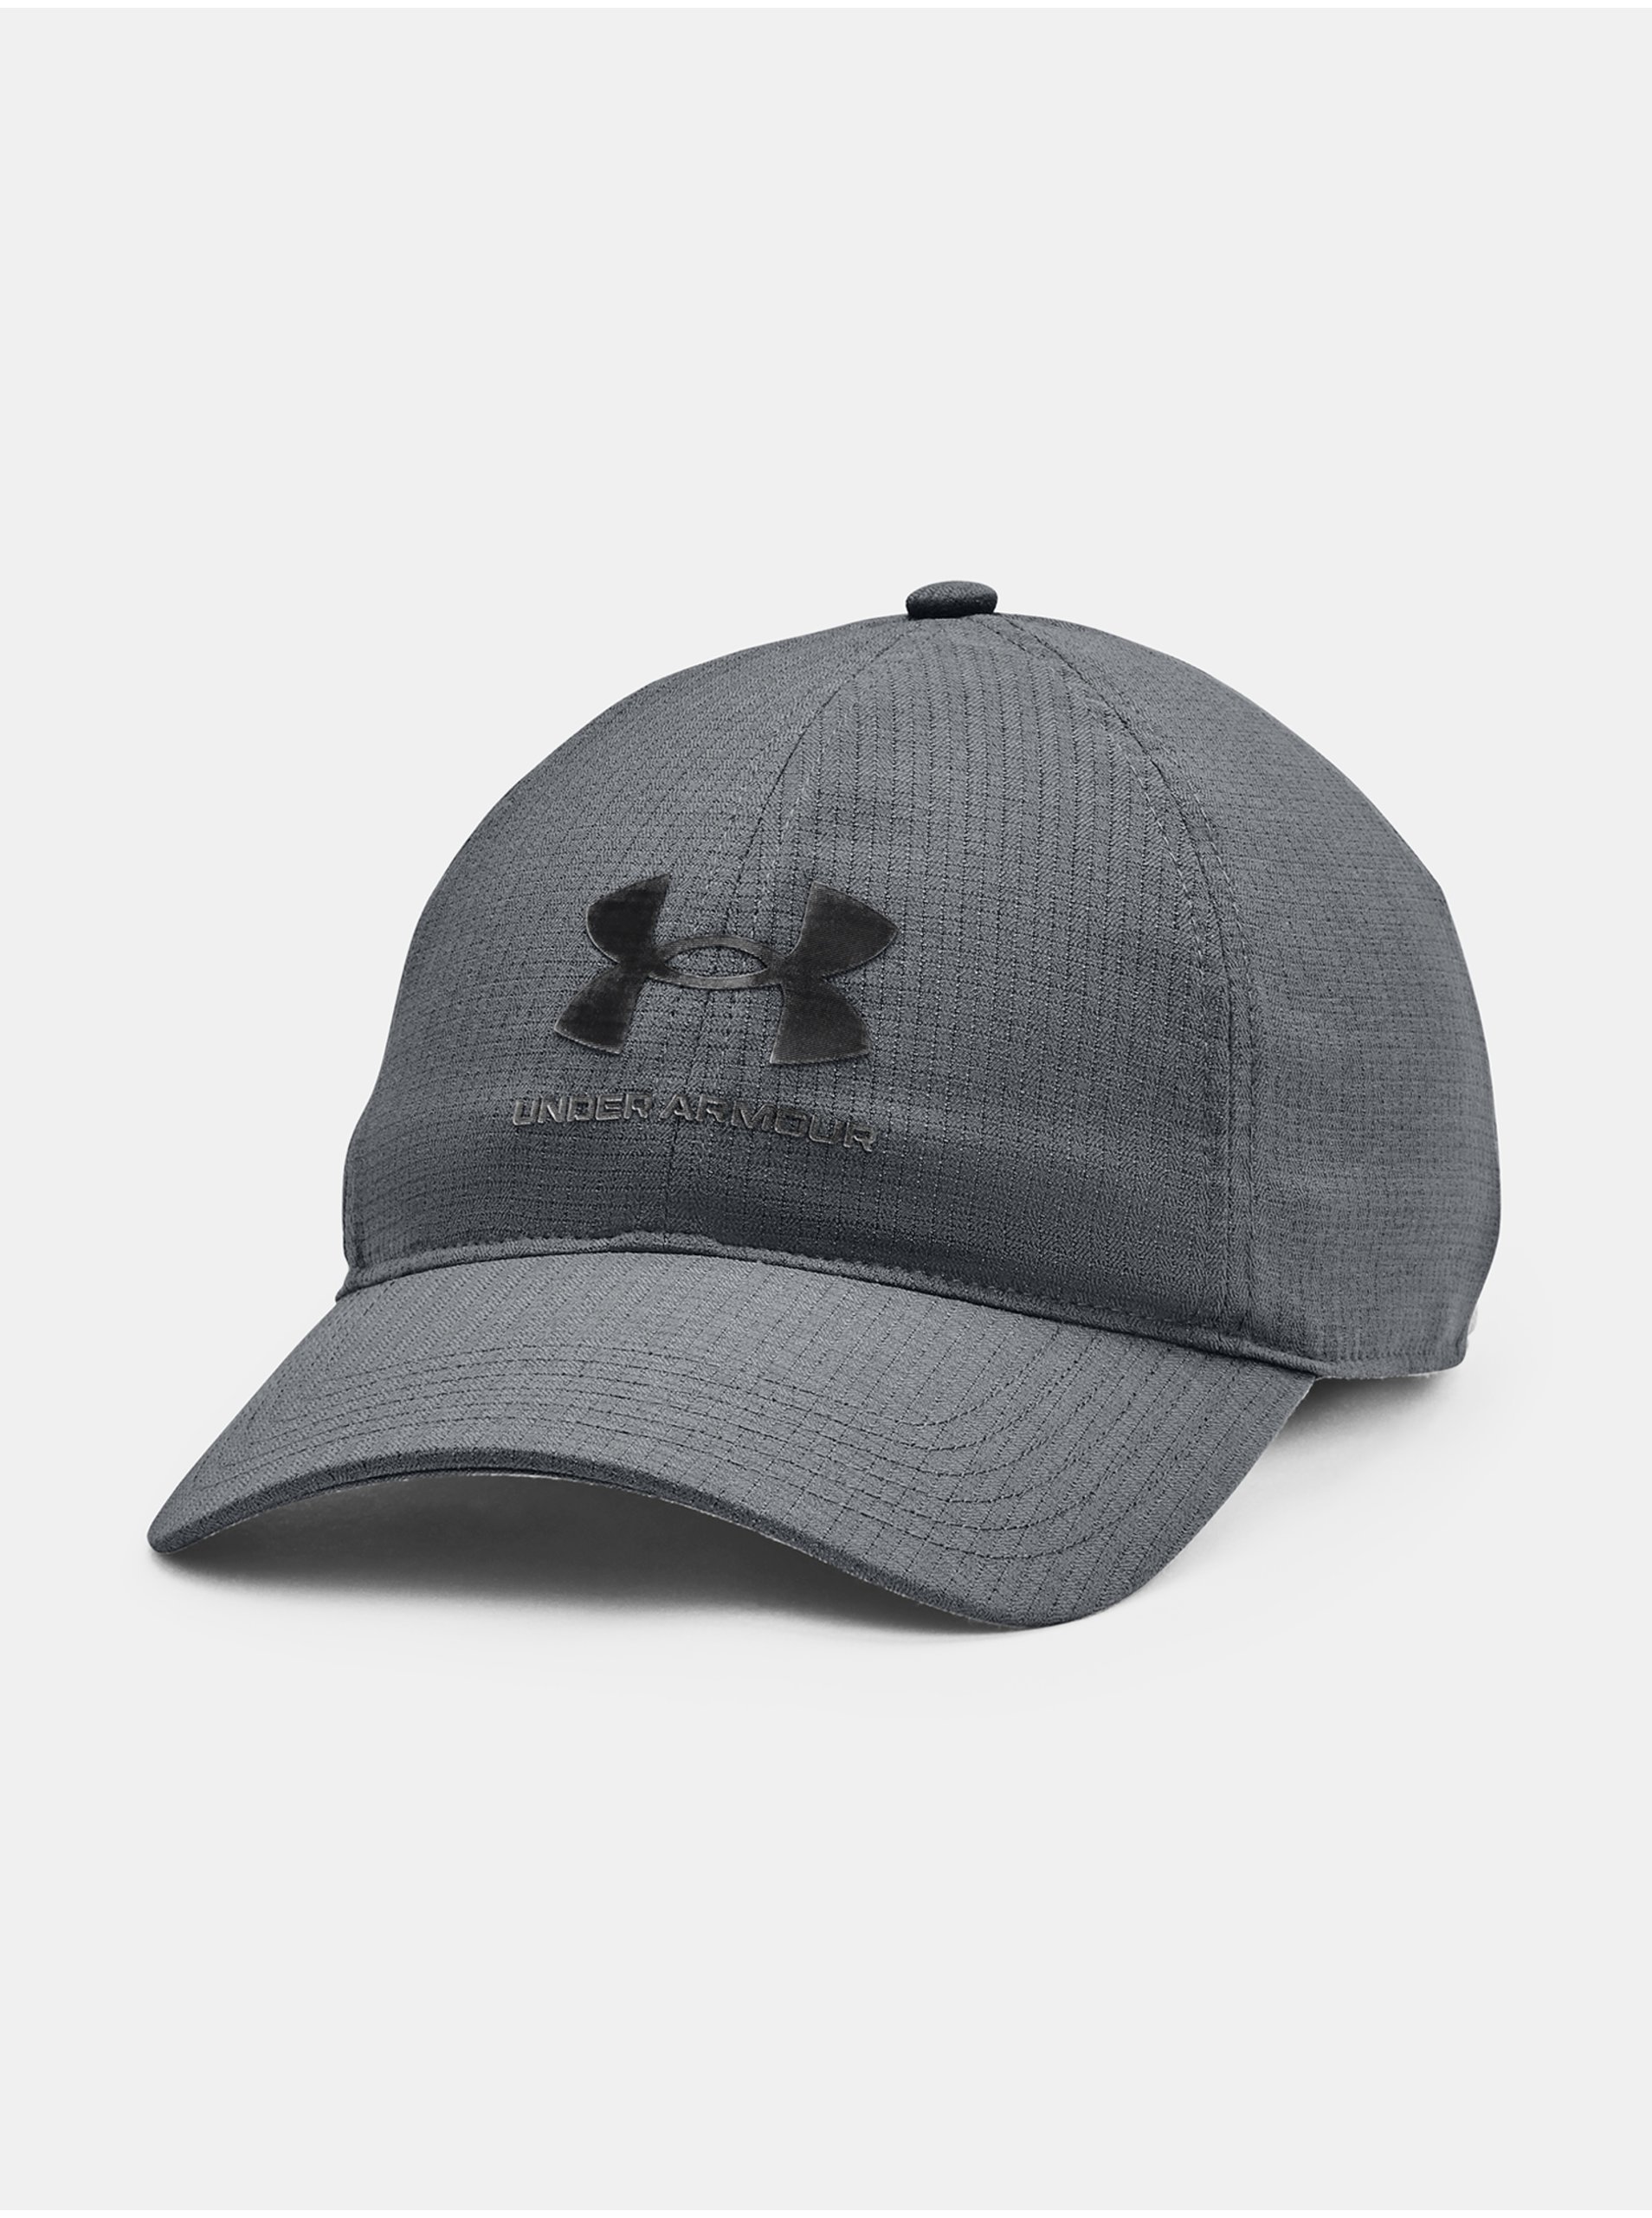 Lacno Iso-Chill ArmourVent™ Adjustable šiltovka Under Armour